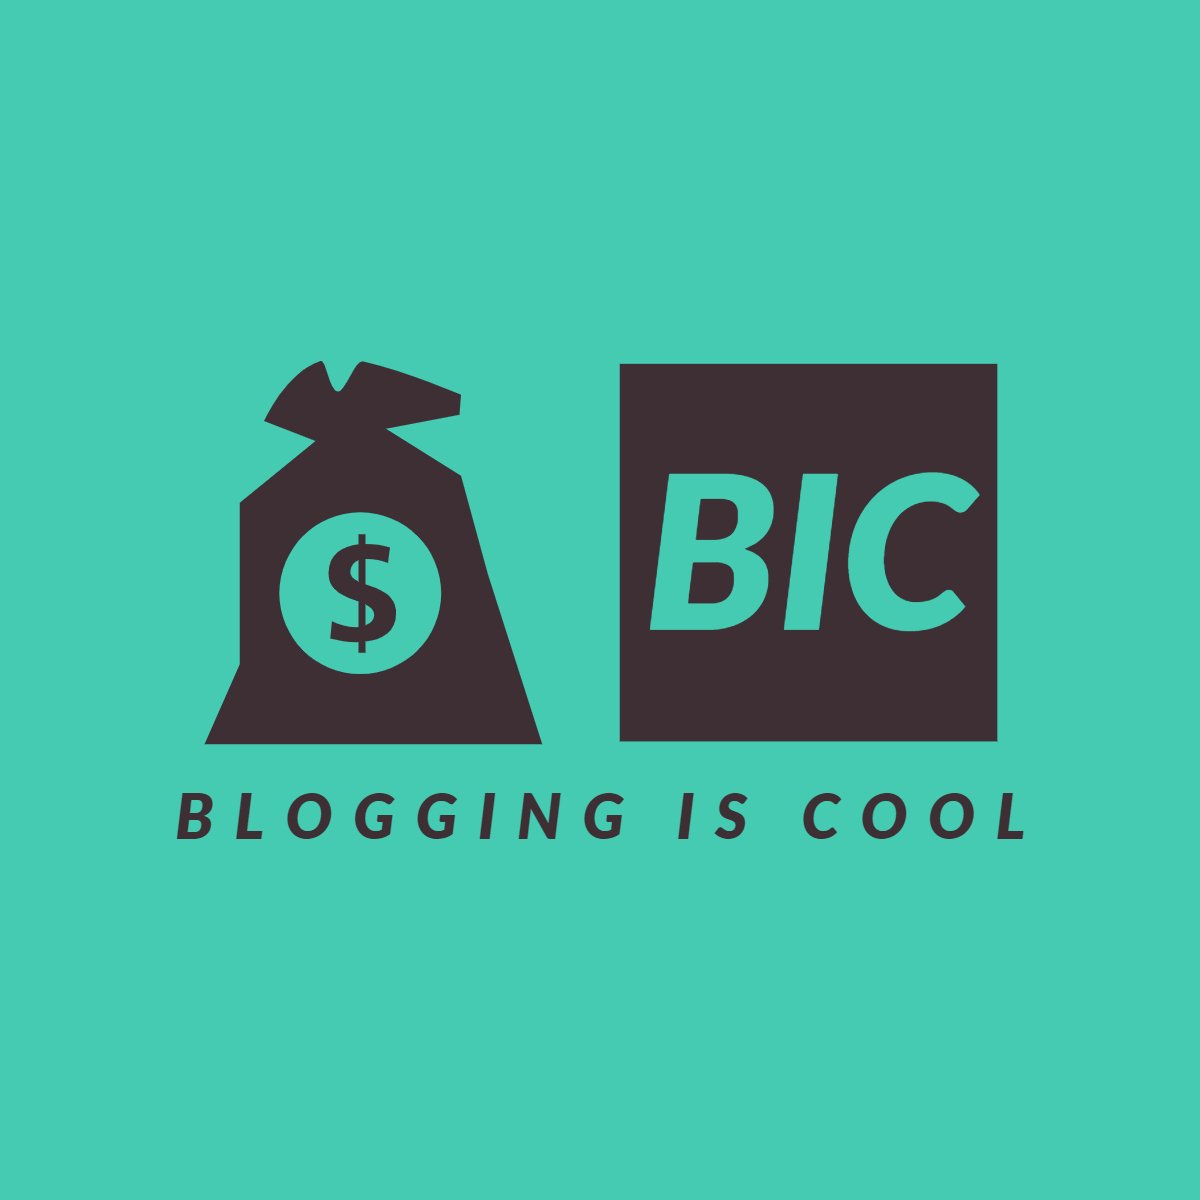 bloggingiscool.com is a blog about blogging for bloggers